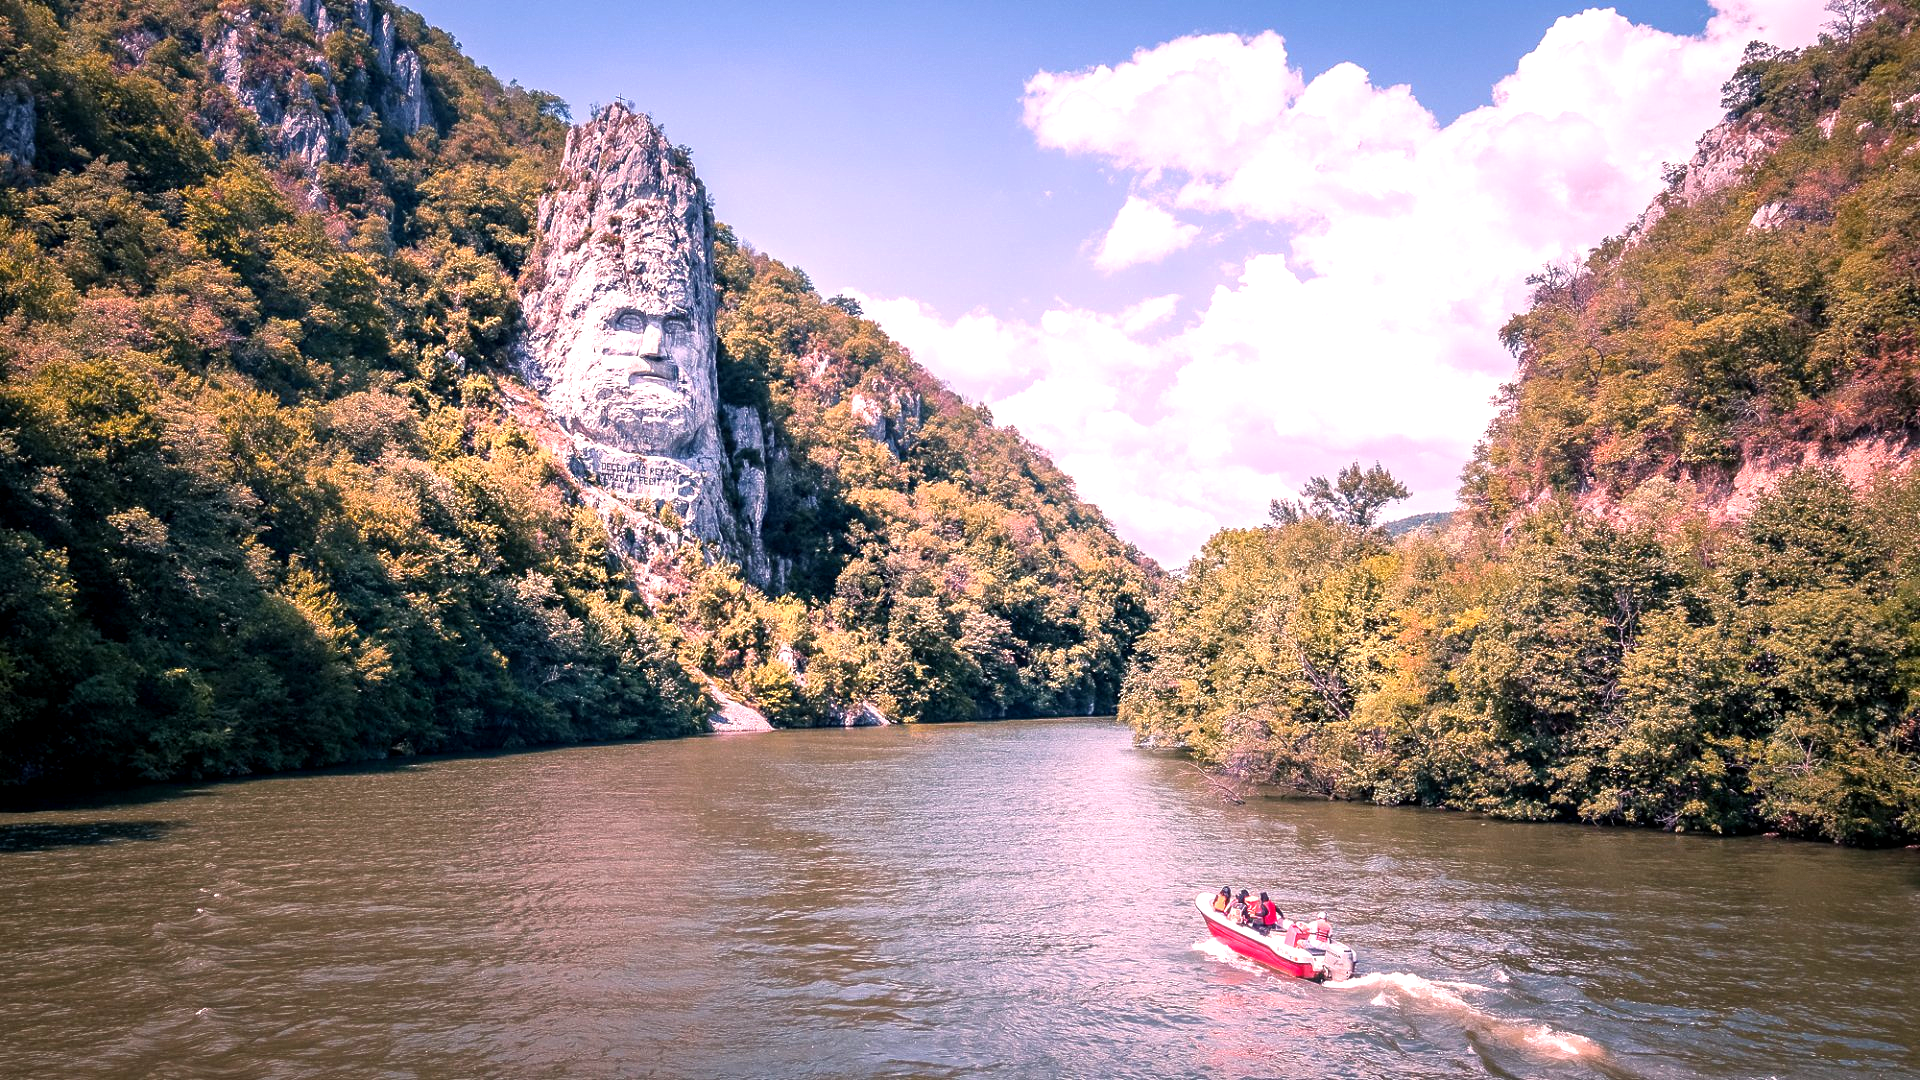 The rock sculpture of  Decebalus (Romanian: Chipul regelui dac Decebal) is a 42.9 m (141 ft) in height and 31.6 m (104 ft) in width carving in rock of the face of Decebalus (r. AD 87–106), the last king of Dacia, who fought against the Roman emperors Domitian and Trajan to preserve the independence of his country, which corresponded to modern Romania; it was  made between 1994 and 2004, on a rocky outcrop on the river Danube, at the Iron Gates, and sets the world record for being the World's Largest rock sculpture on a river's bank, according to the World Record Academy.